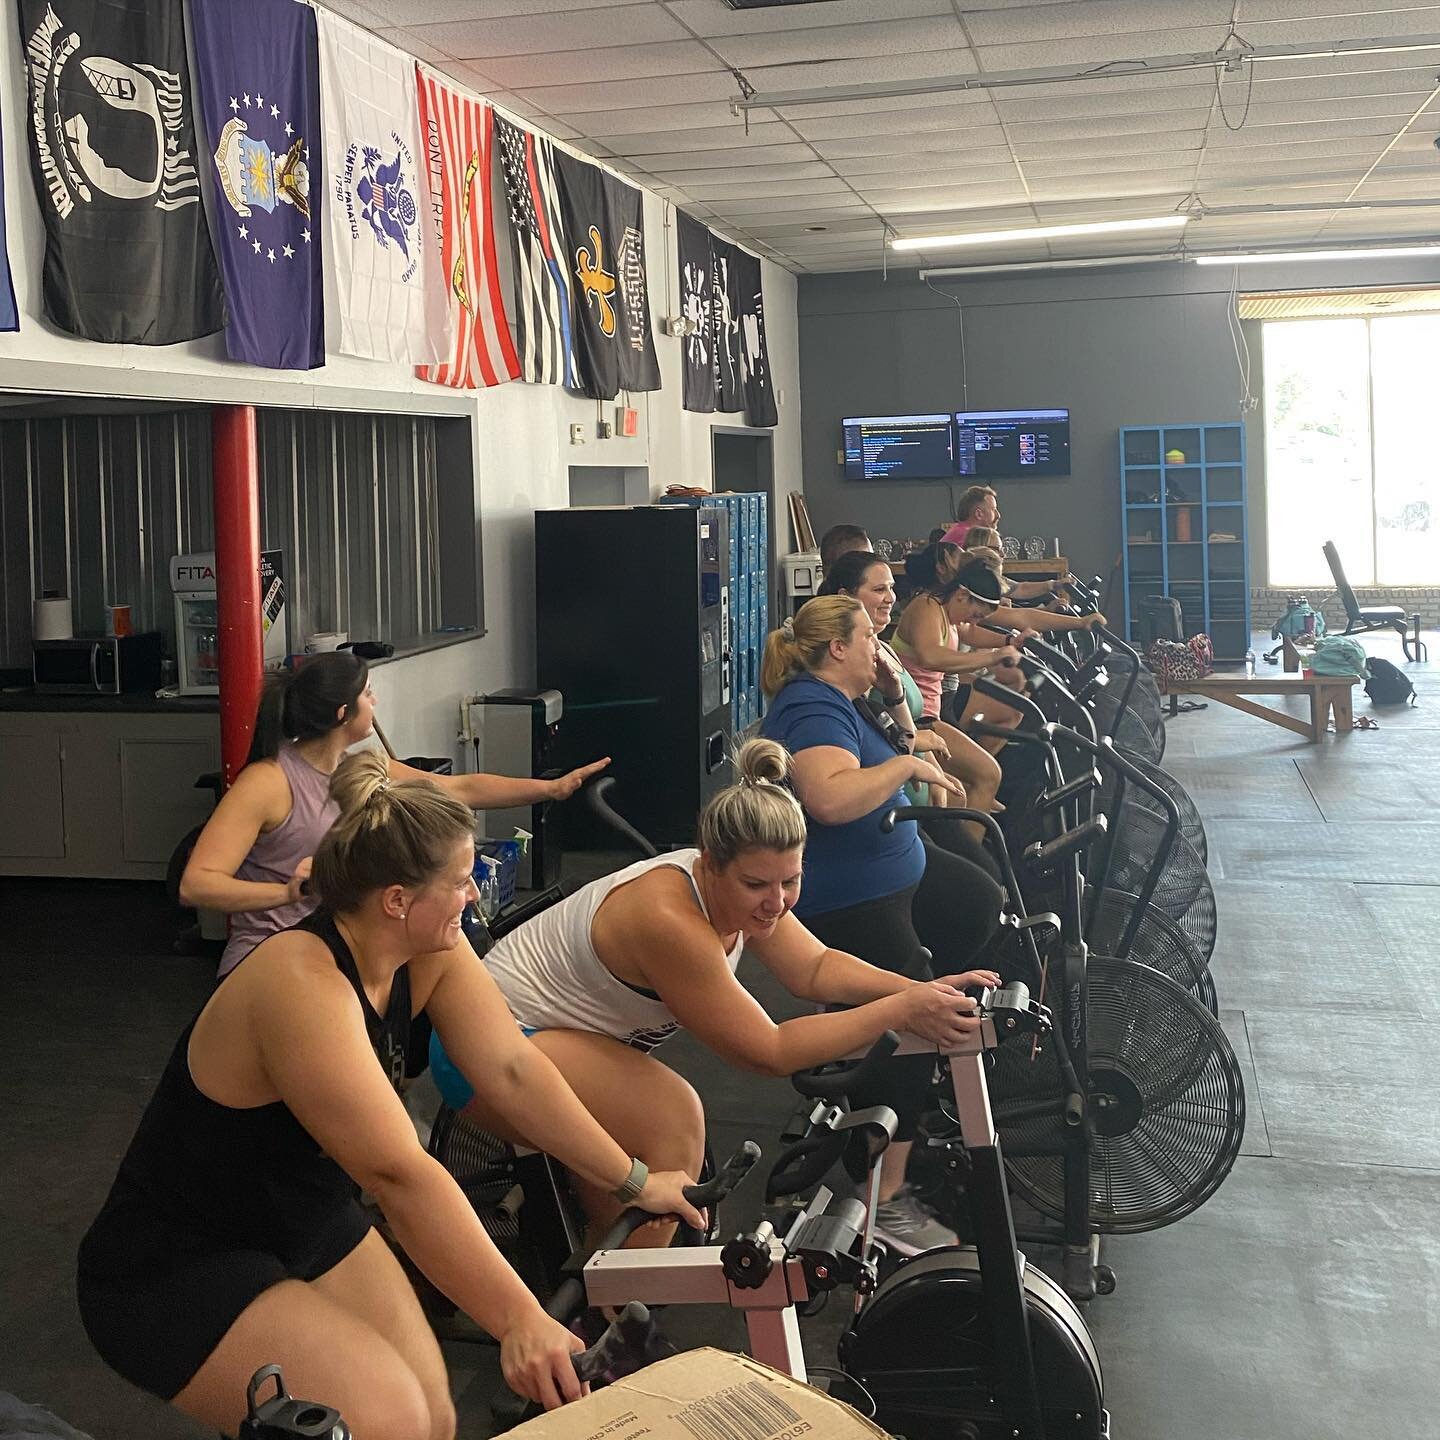 So many smiles before&hellip; not so many after&hellip; #riverparishcrossfit #rpcf #crossfithealth #hwpo #doworkson #supportyourlocalbox #crossfit #community #theirbesthour #berelentless #stcharlesparish #luling #forgingelitehealth #spealprogramming 